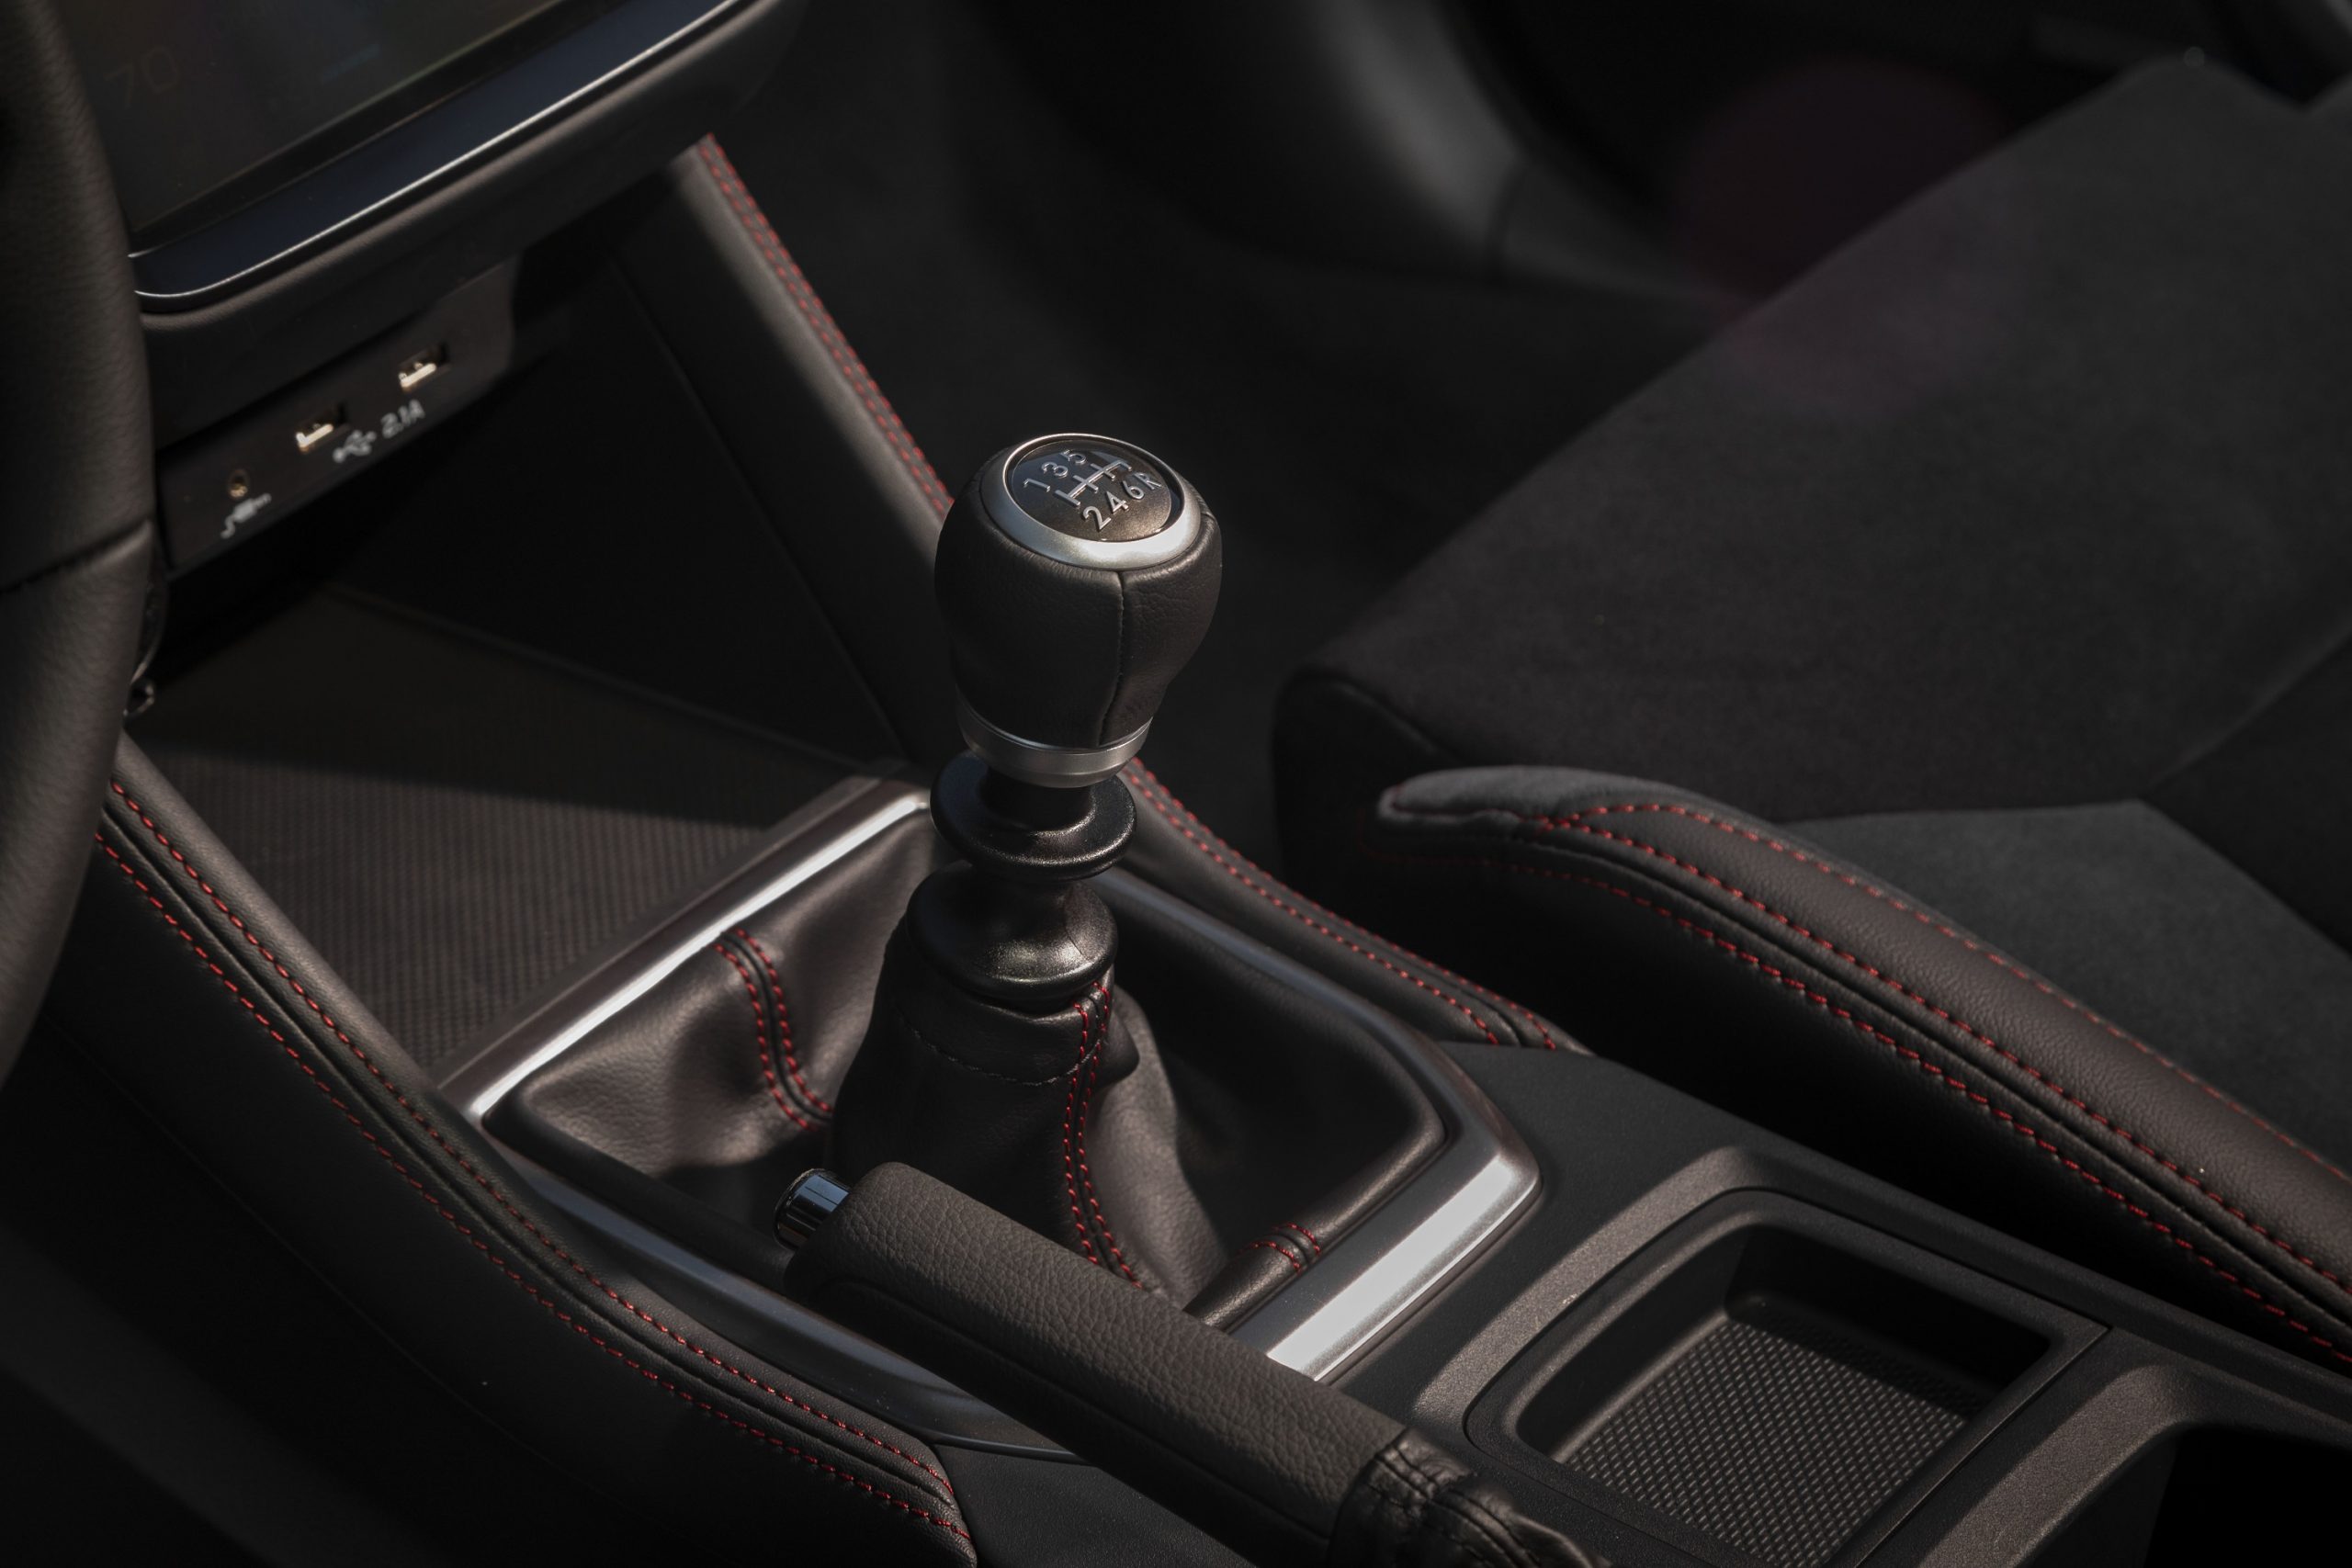 The manual transmission in the new WRX with red contrast stitching